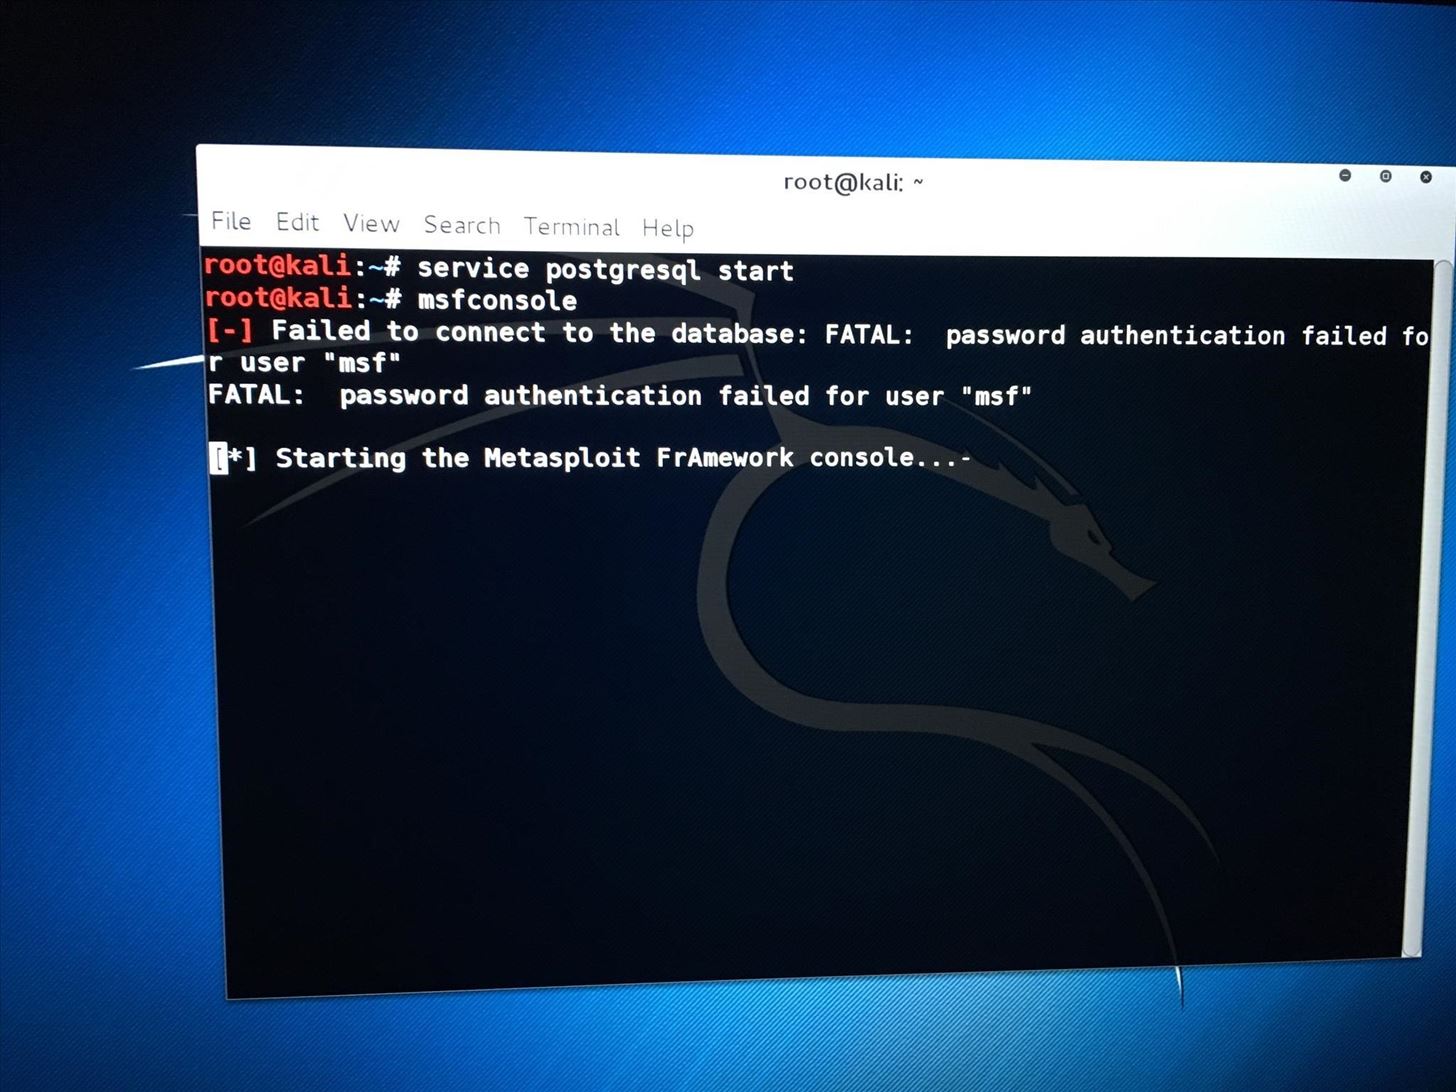 3 Problems About Metasploit(with Screenshots)